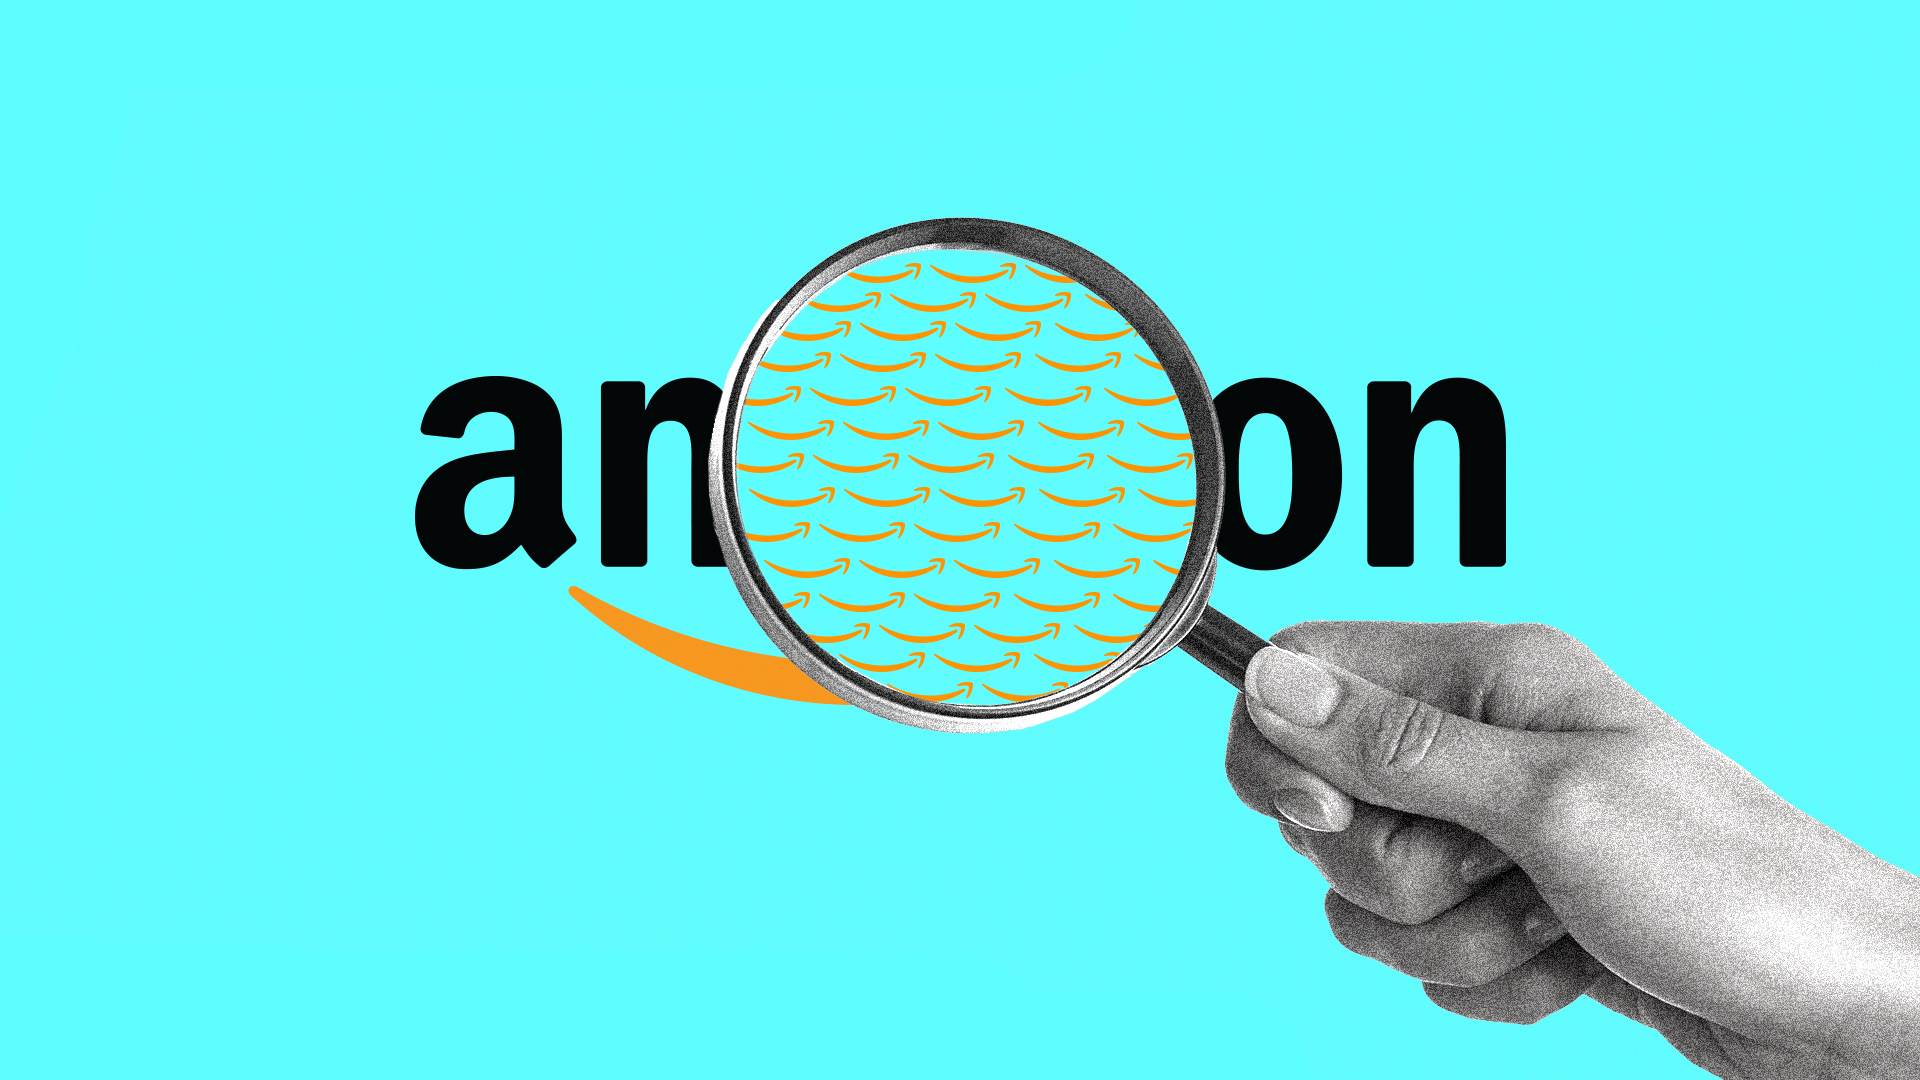 Illustration of a magnifying glass examining the Amazon logo and finding it made up of little Amazon smiles.